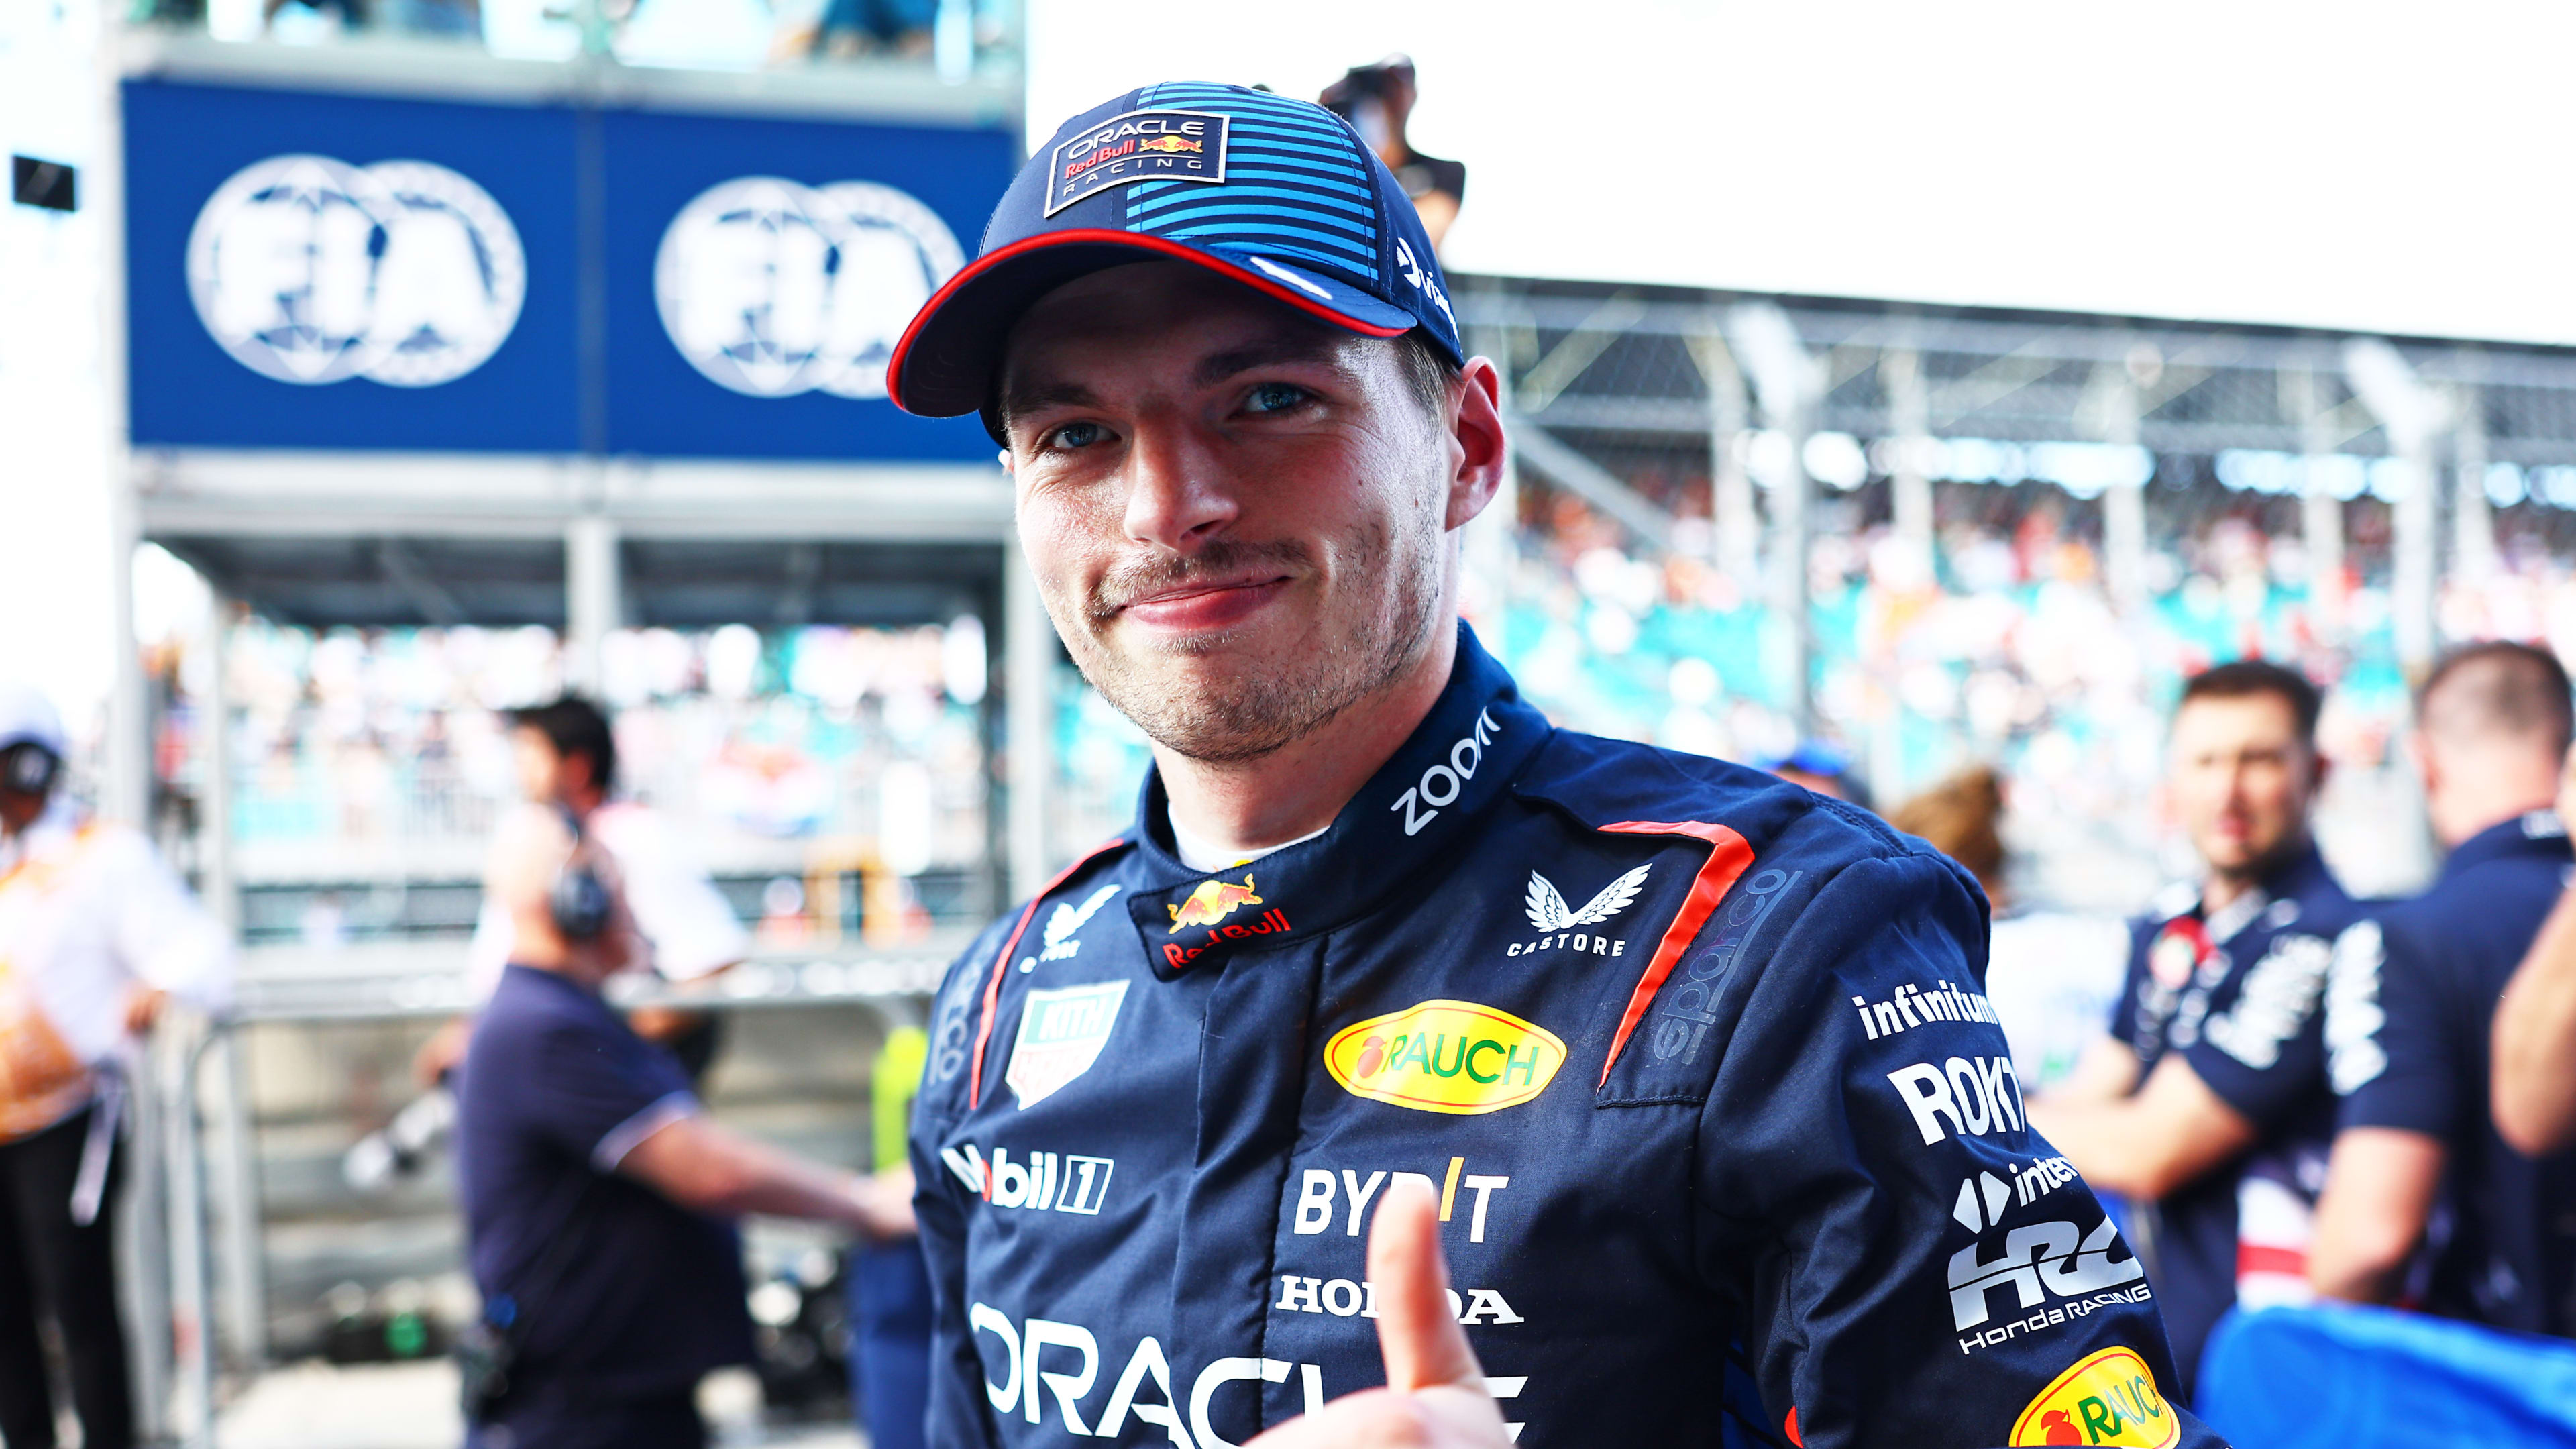 2024 Miami Grand Prix Sprint qualifying report and highlights: Verstappen takes first place in Miami Sprint qualifying ahead of Leclerc and Perez